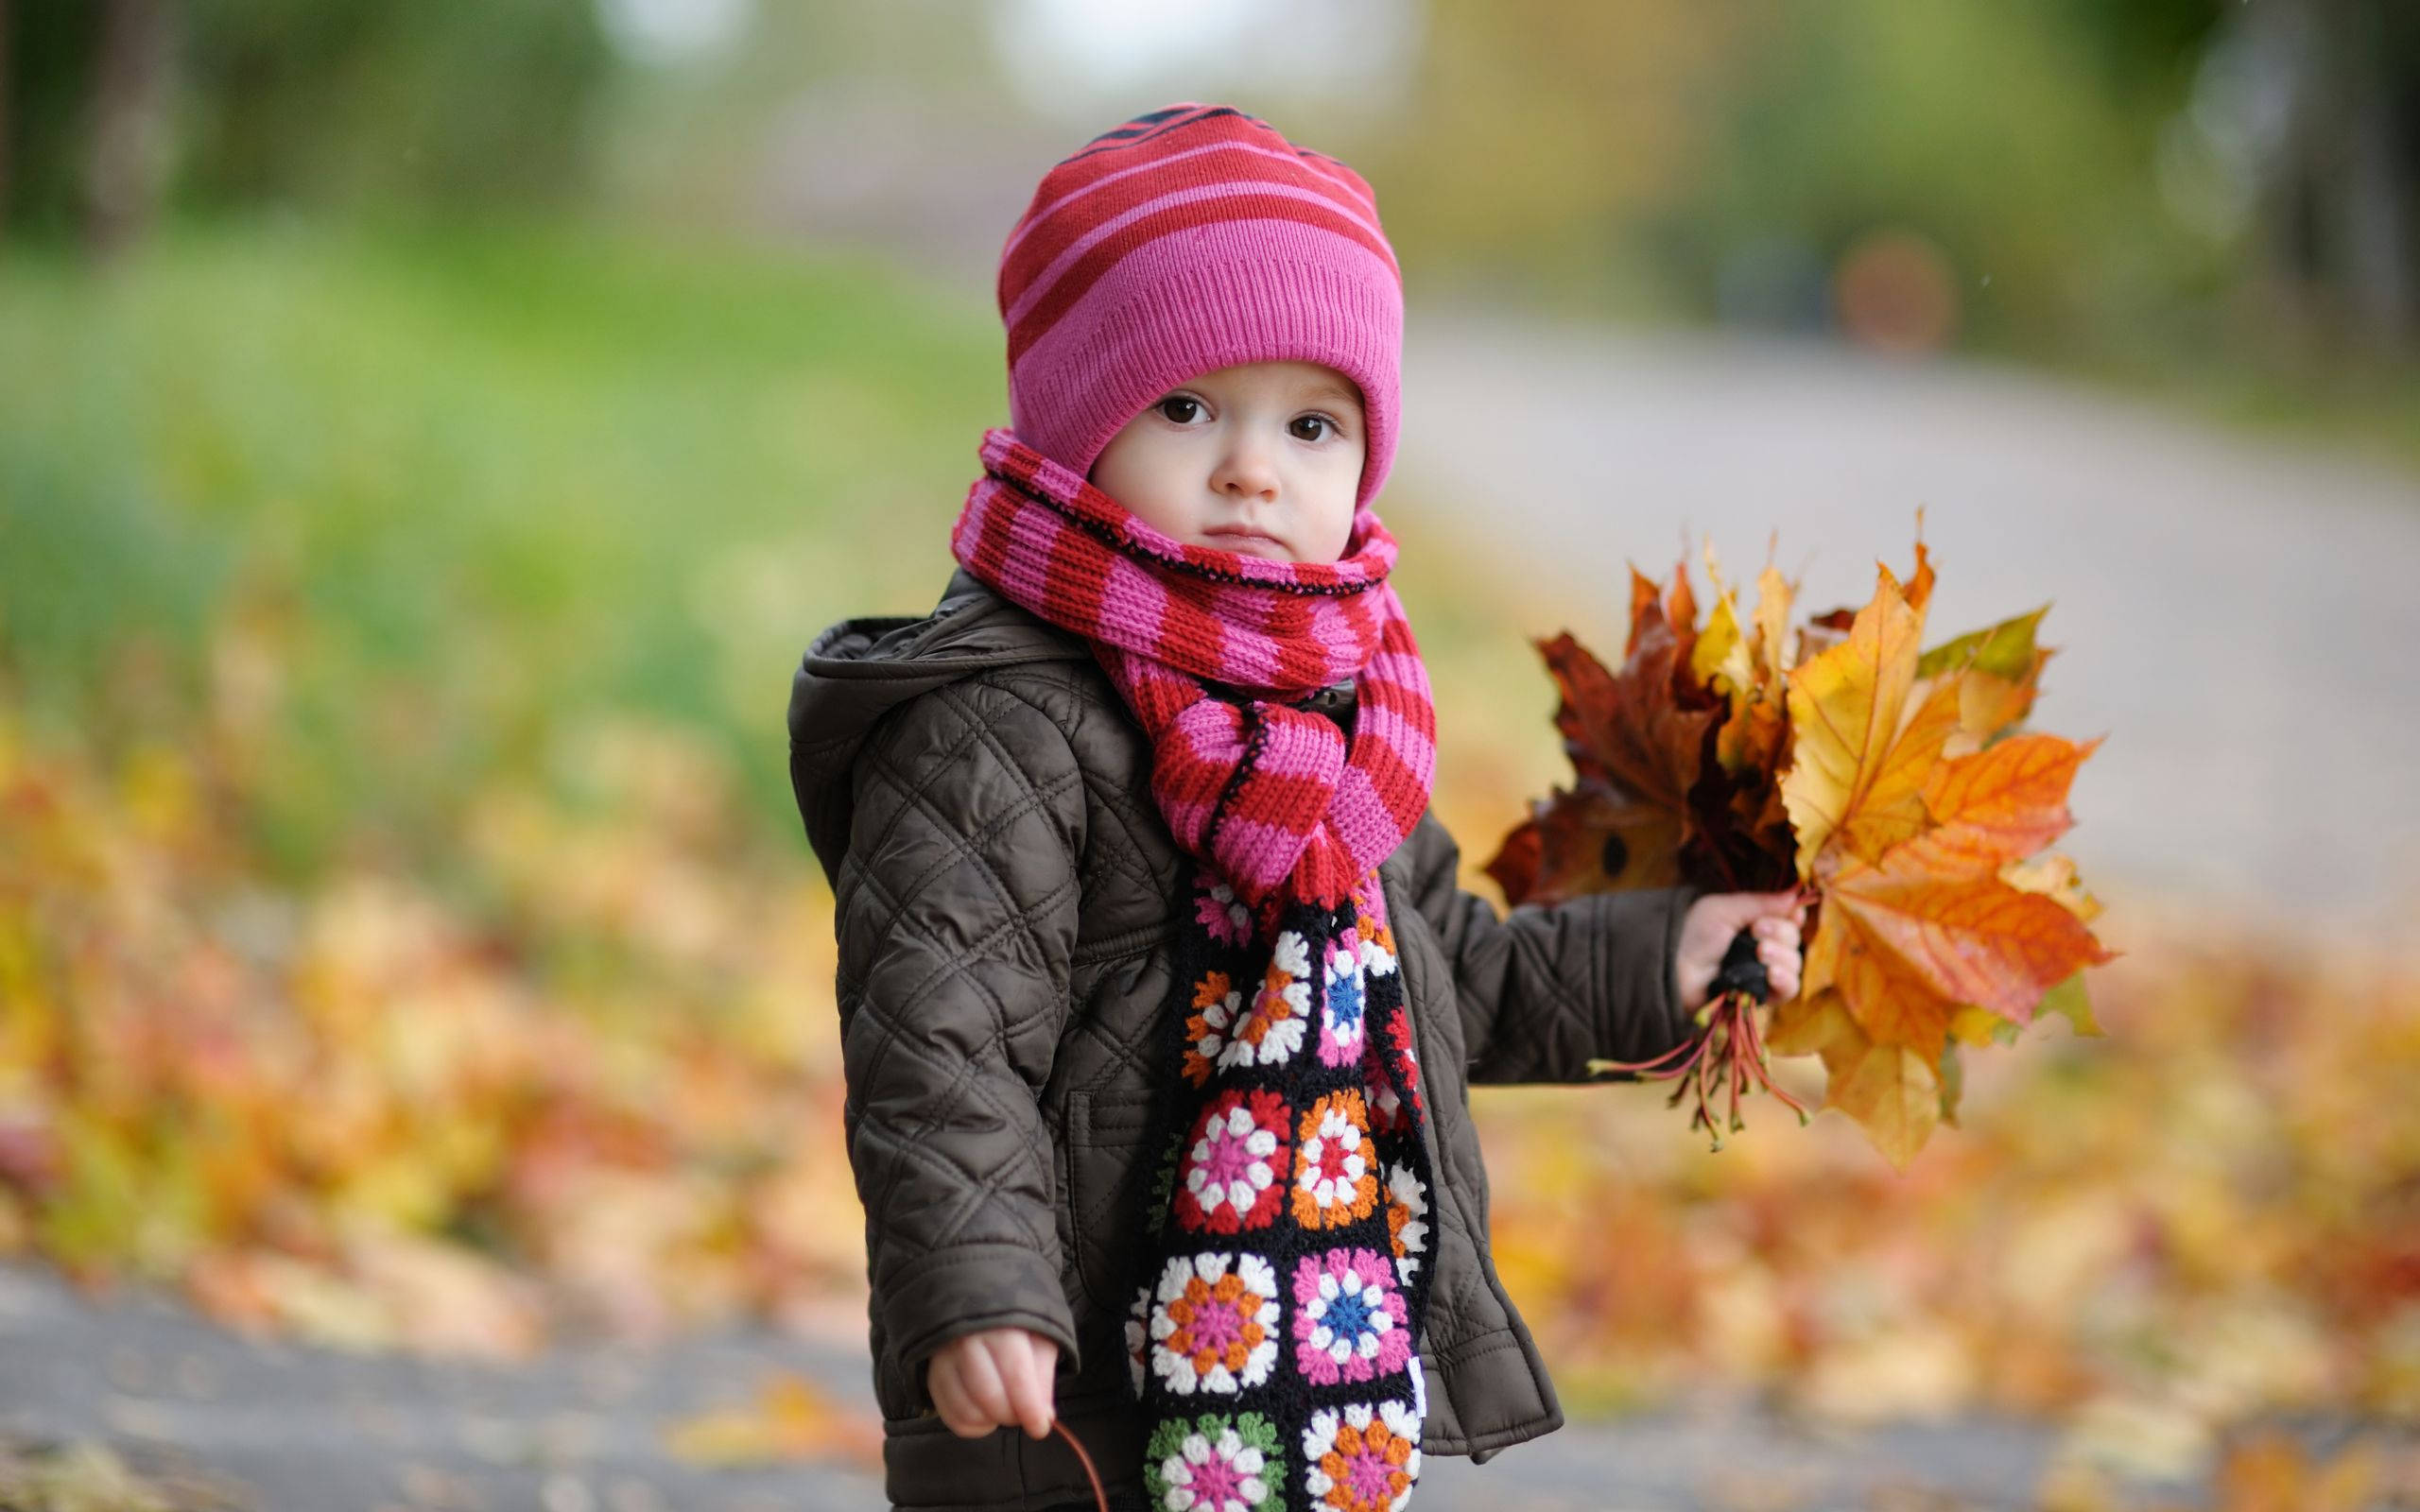 Autumn Leaves Of Baby Love Wallpaper